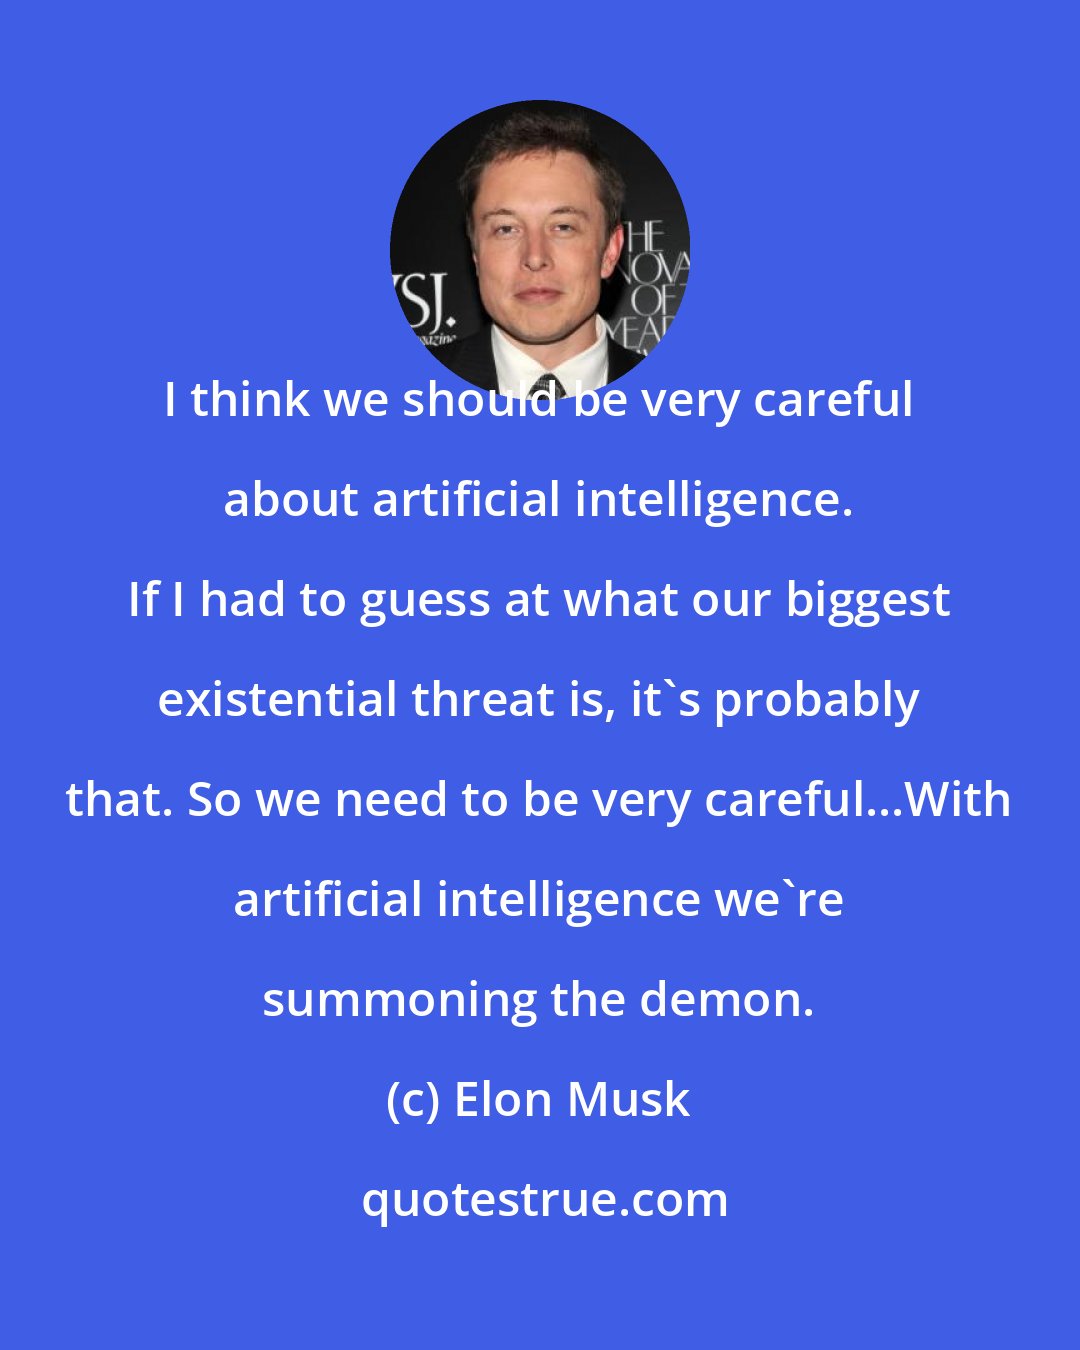 Elon Musk: I think we should be very careful about artificial intelligence. If I had to guess at what our biggest existential threat is, it's probably that. So we need to be very careful...With artificial intelligence we're summoning the demon.